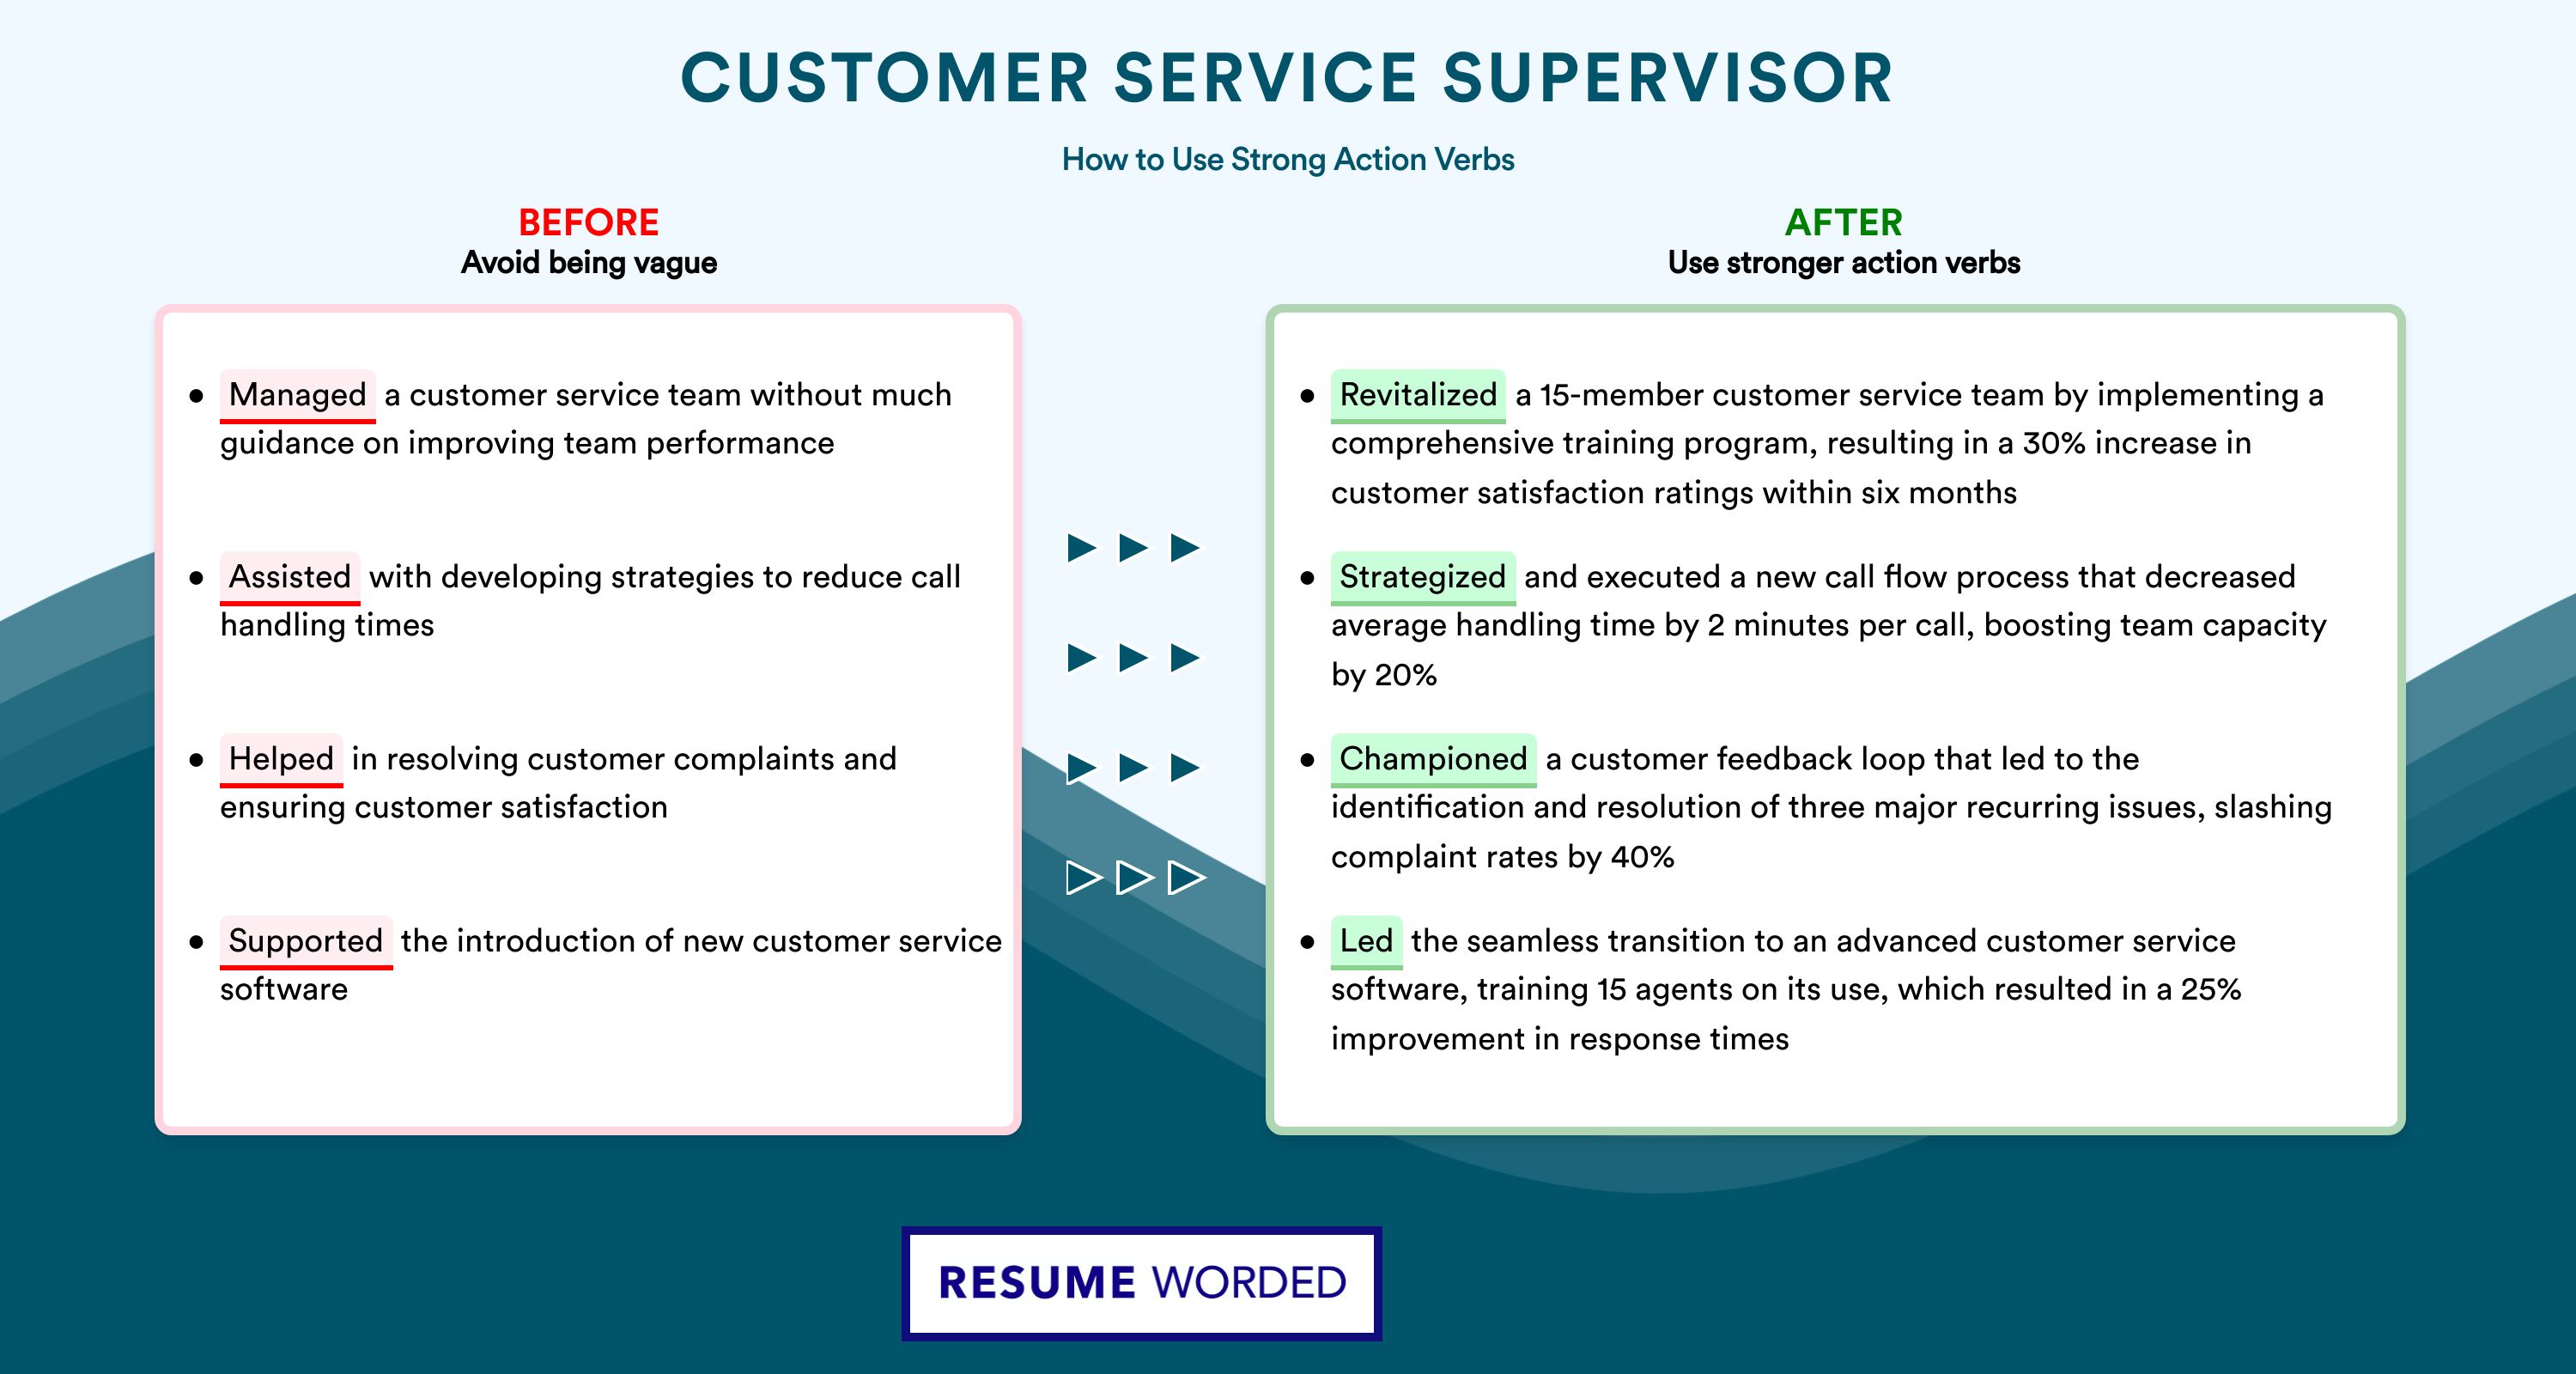 Action Verbs for Customer Service Supervisor